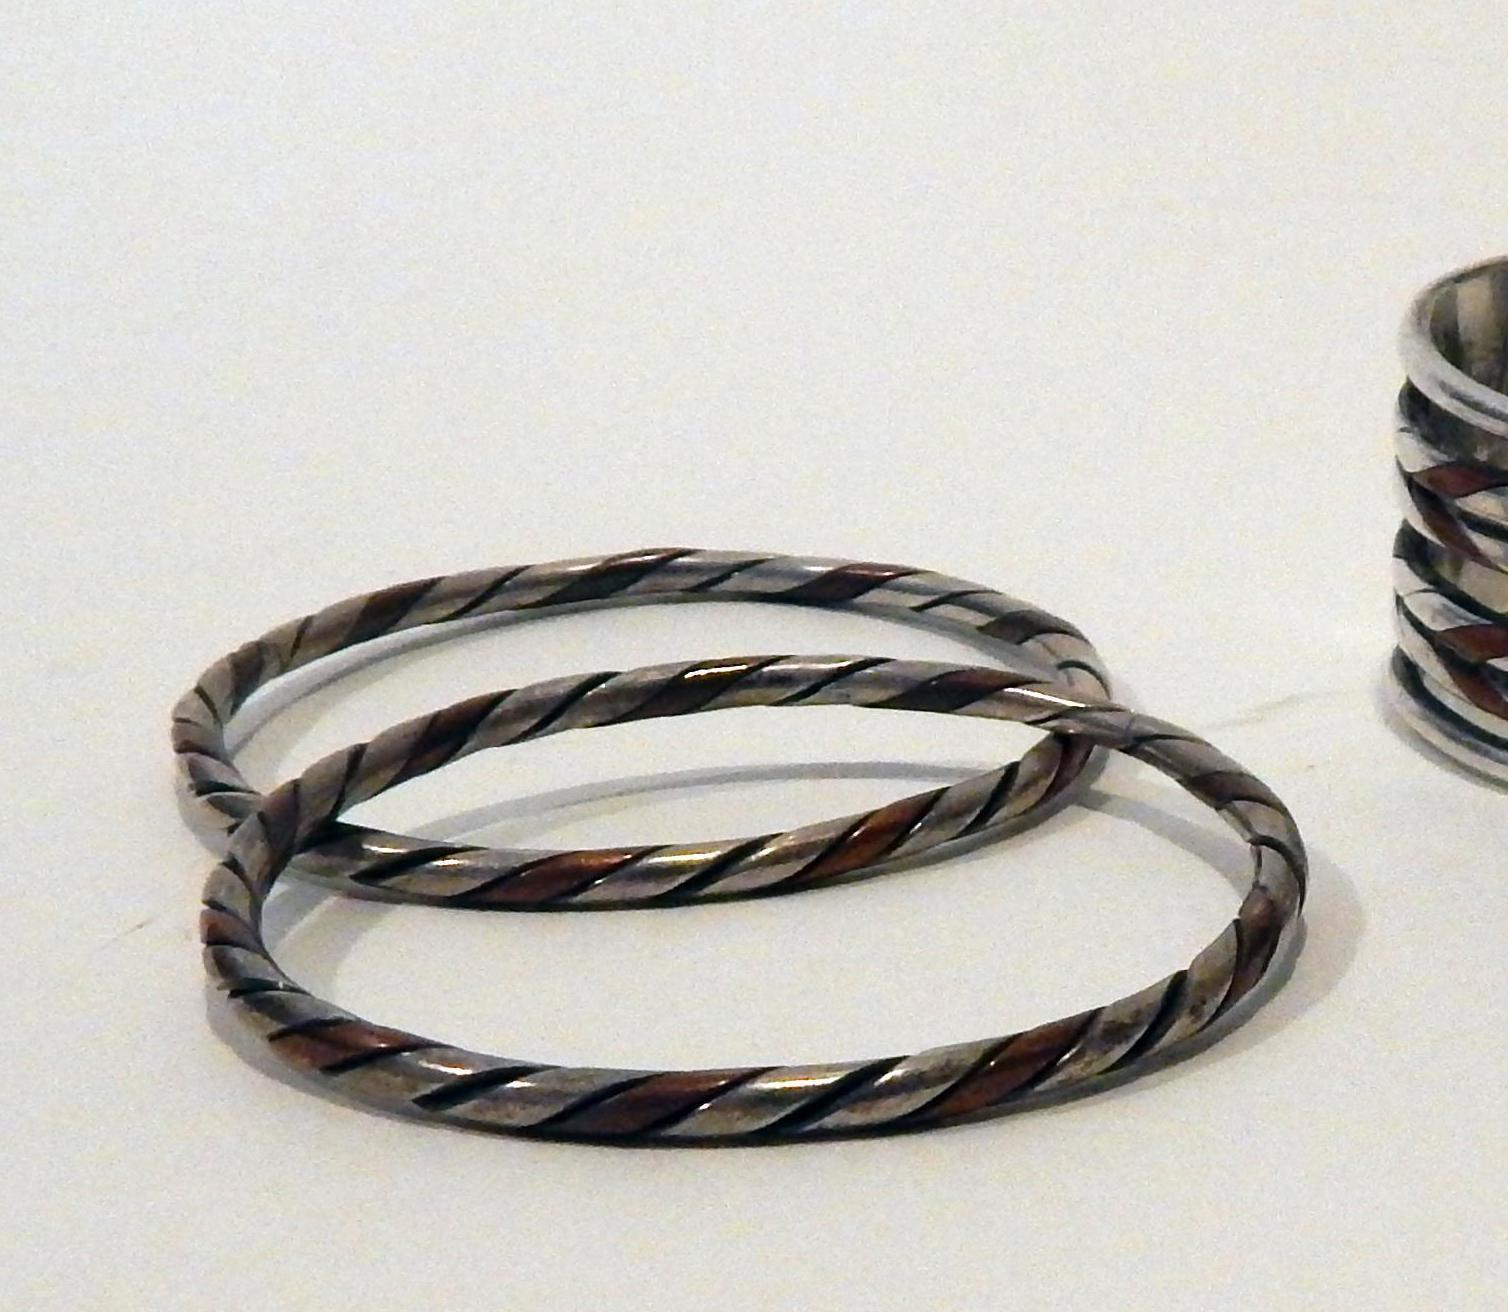 William Spratling, Taxco, Mexico, circa 1940s copper and sterling bangle bracelet set 
The set includes 2 unmarked bangles by Spratling that measure 2 3/4